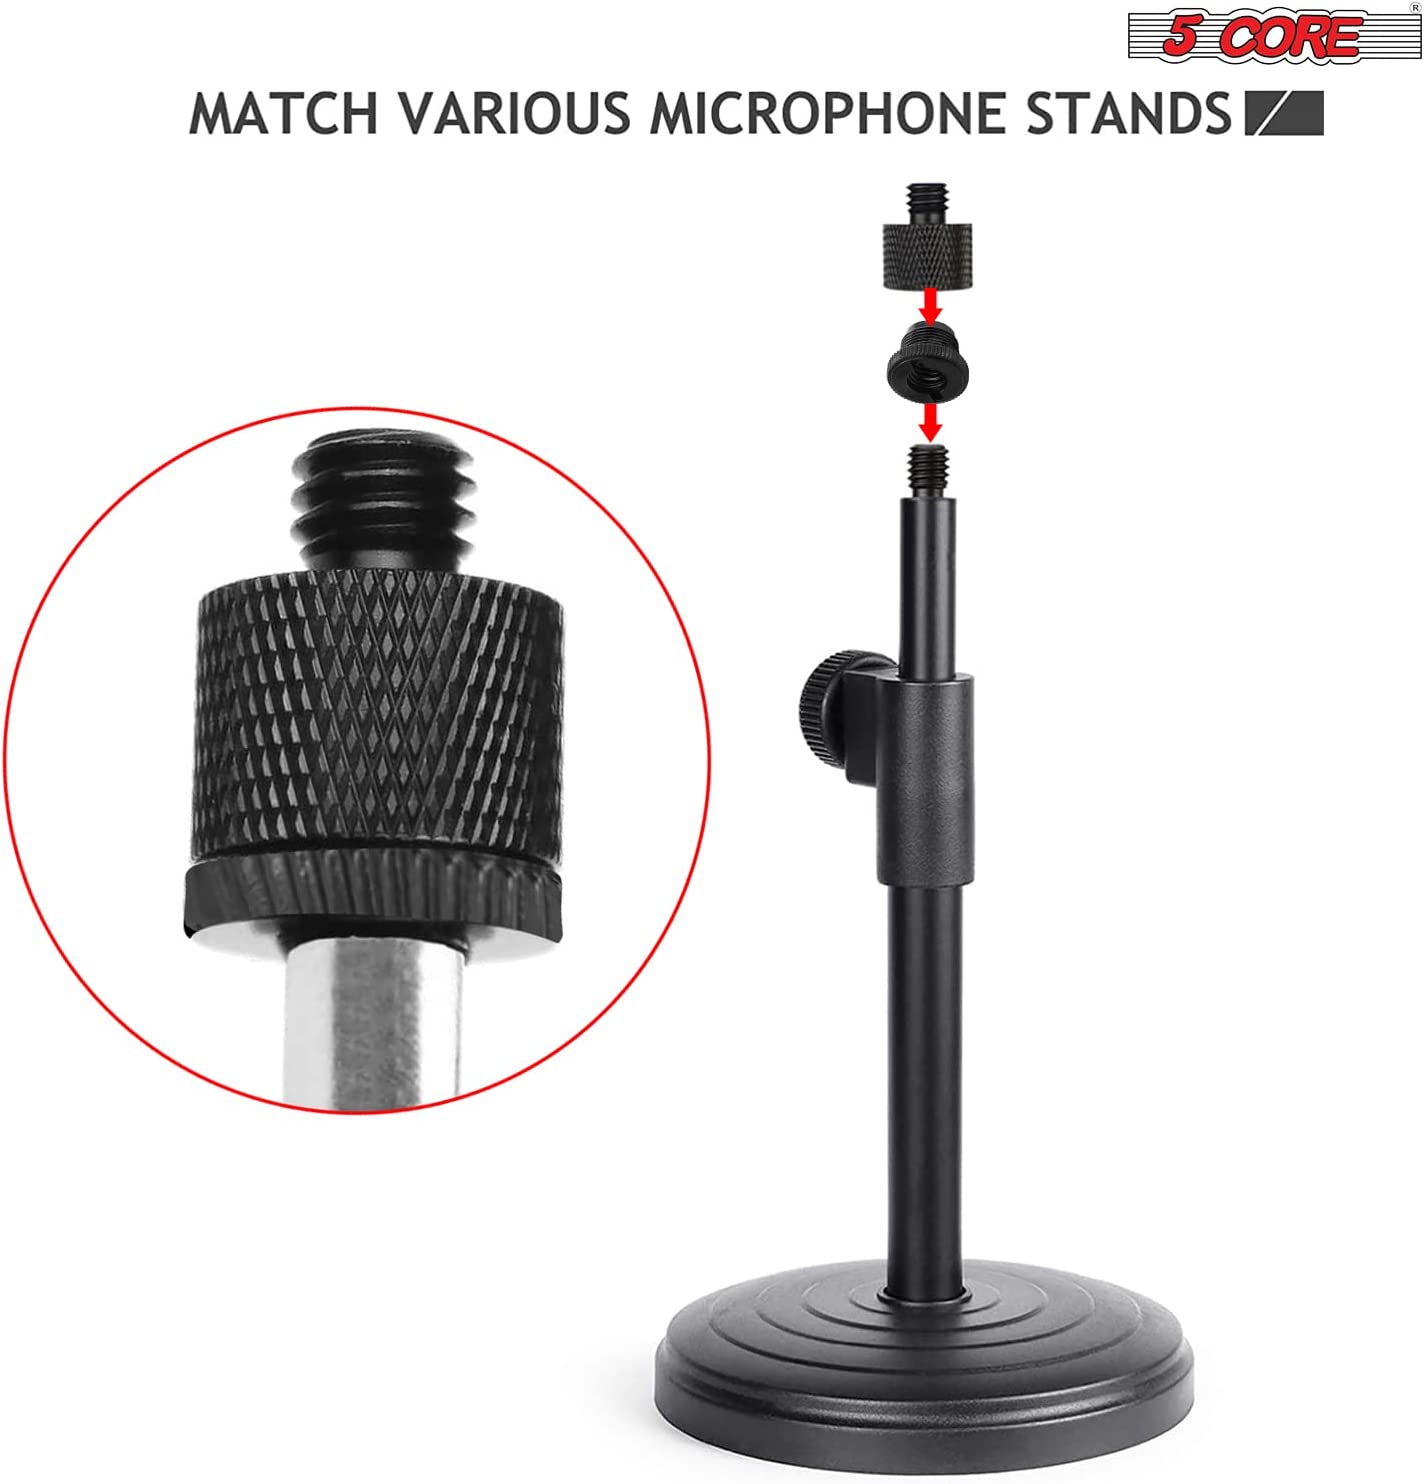 5 Core Mic Stand Adapter 4 Pieces Black 3/8 Female to 5/8 Male Plastic Mic Screw Adapter Microphone Tripod Stand Screw - MS ADP P BLK 4PCS-2